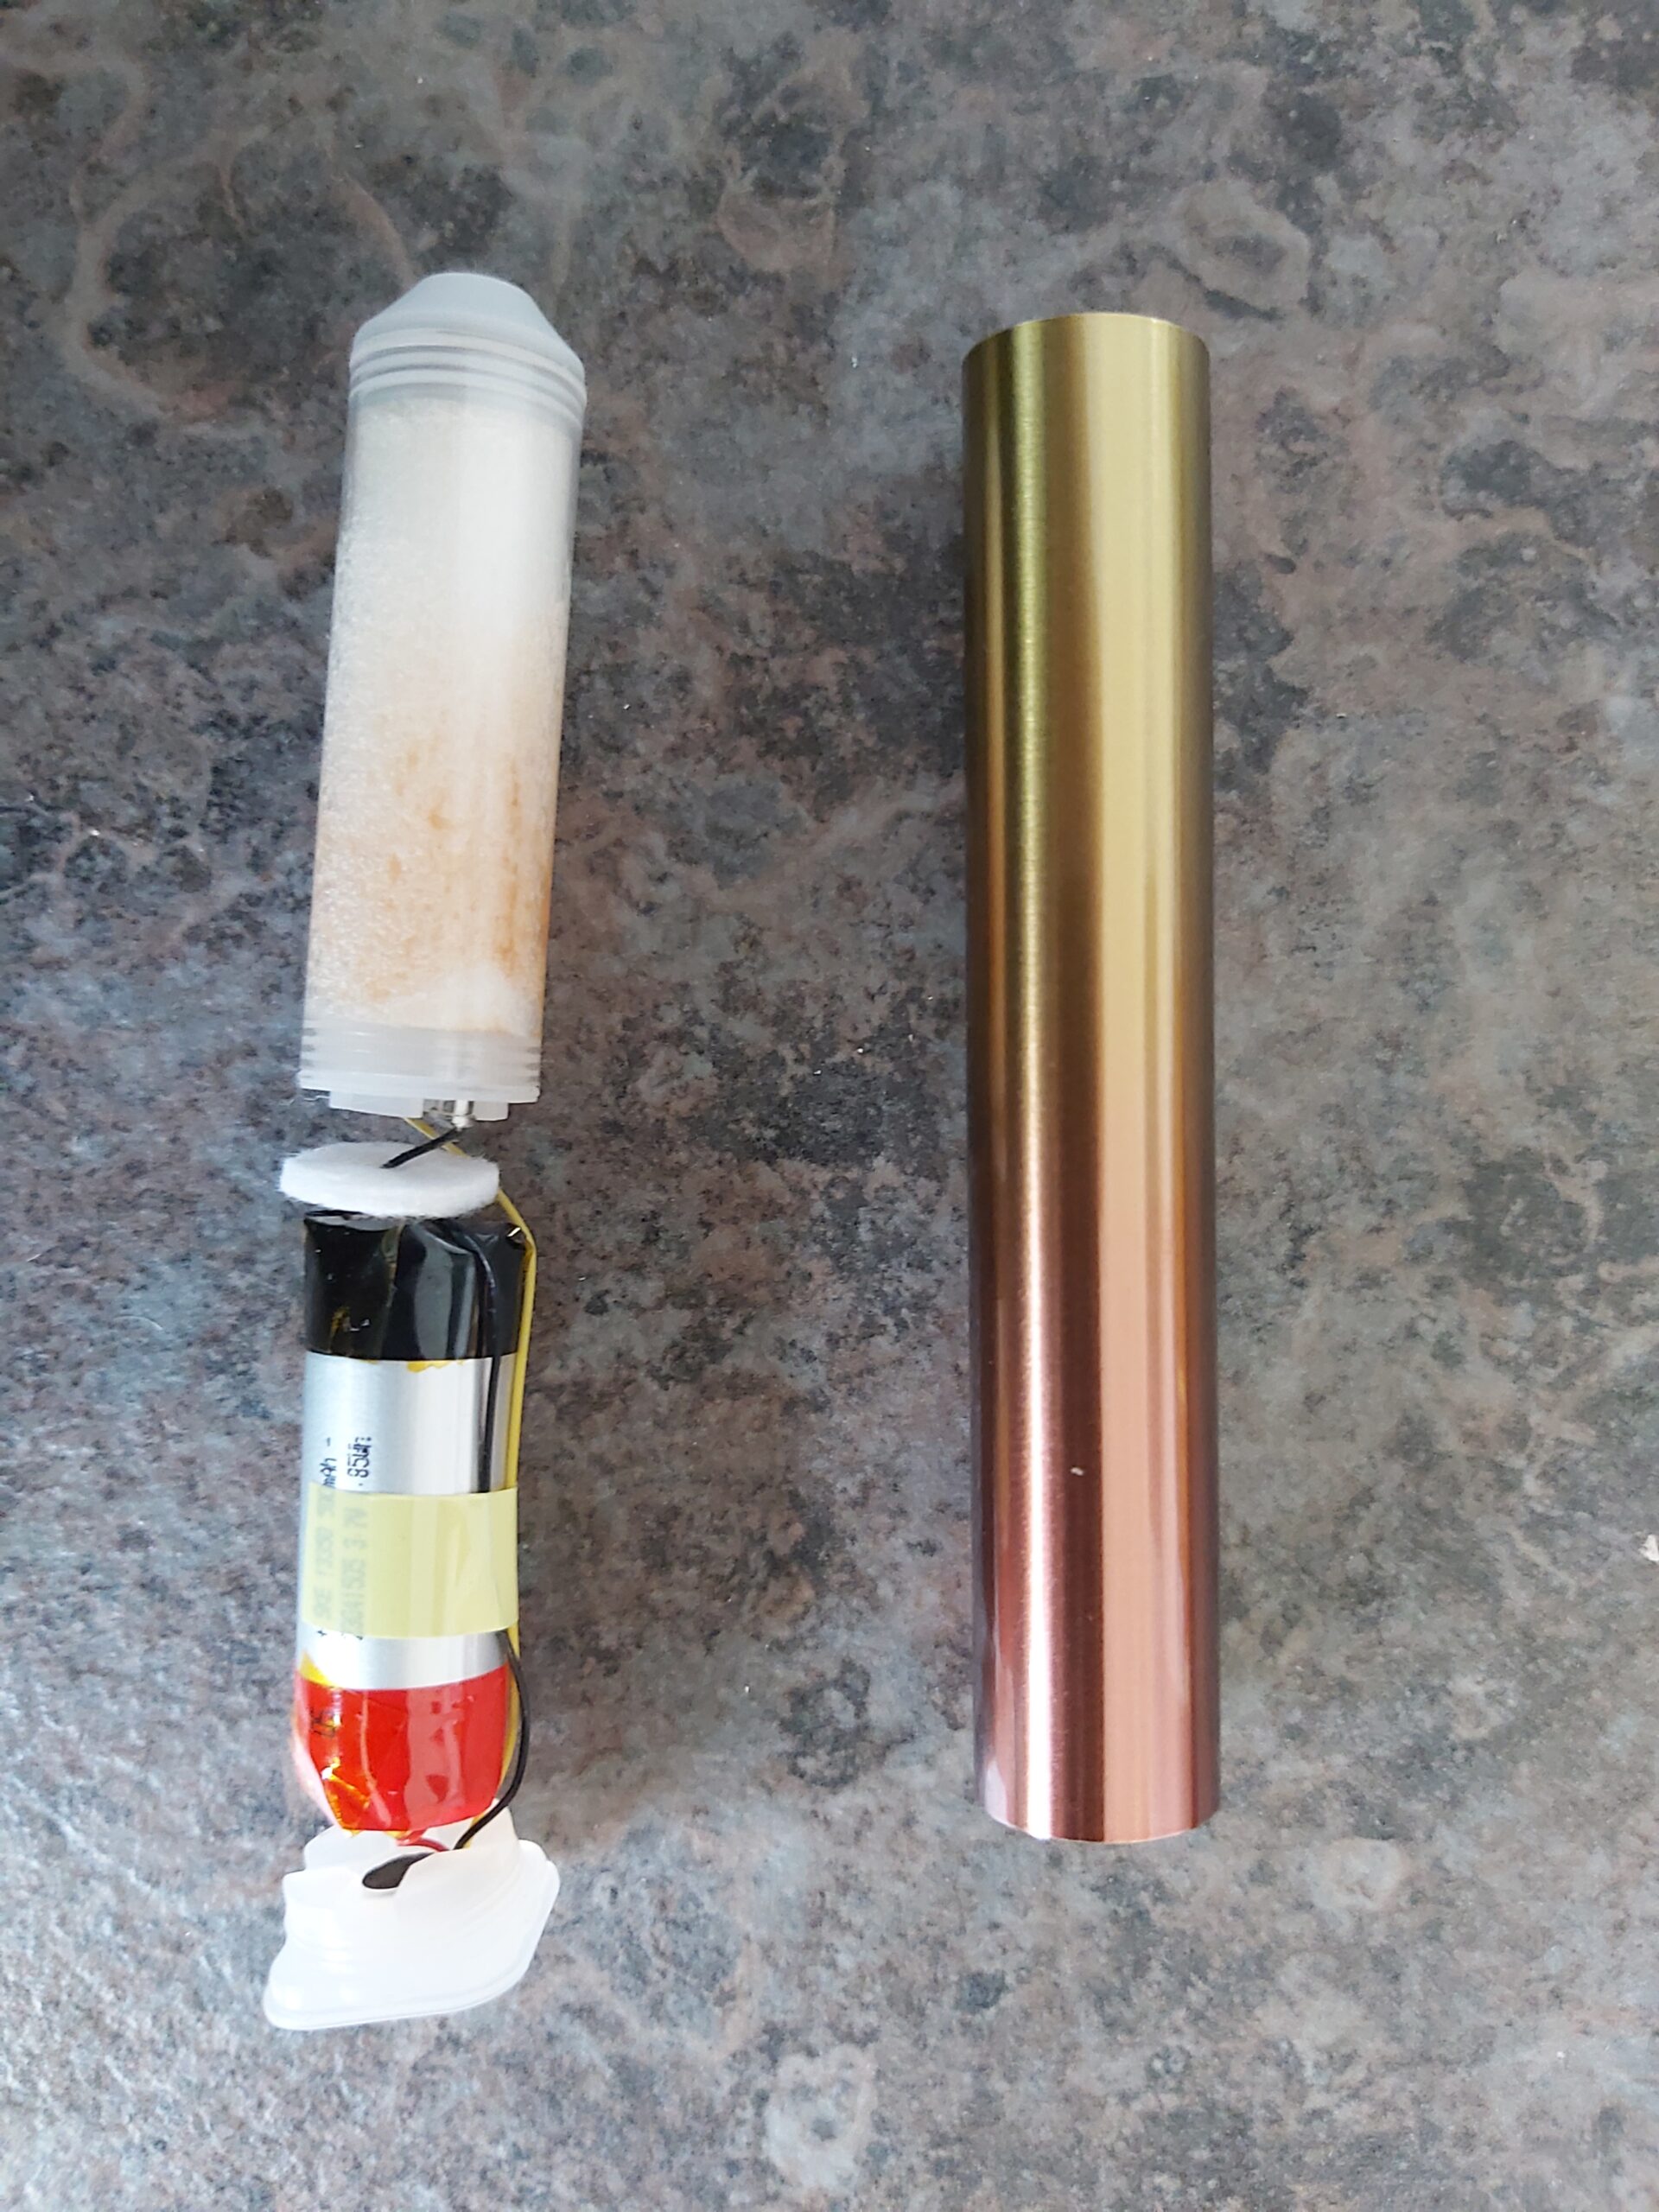 Disassembling Crystal Bar Disposable Electronic Vape or Cigarette Pull Again While Holding The Metal Tube